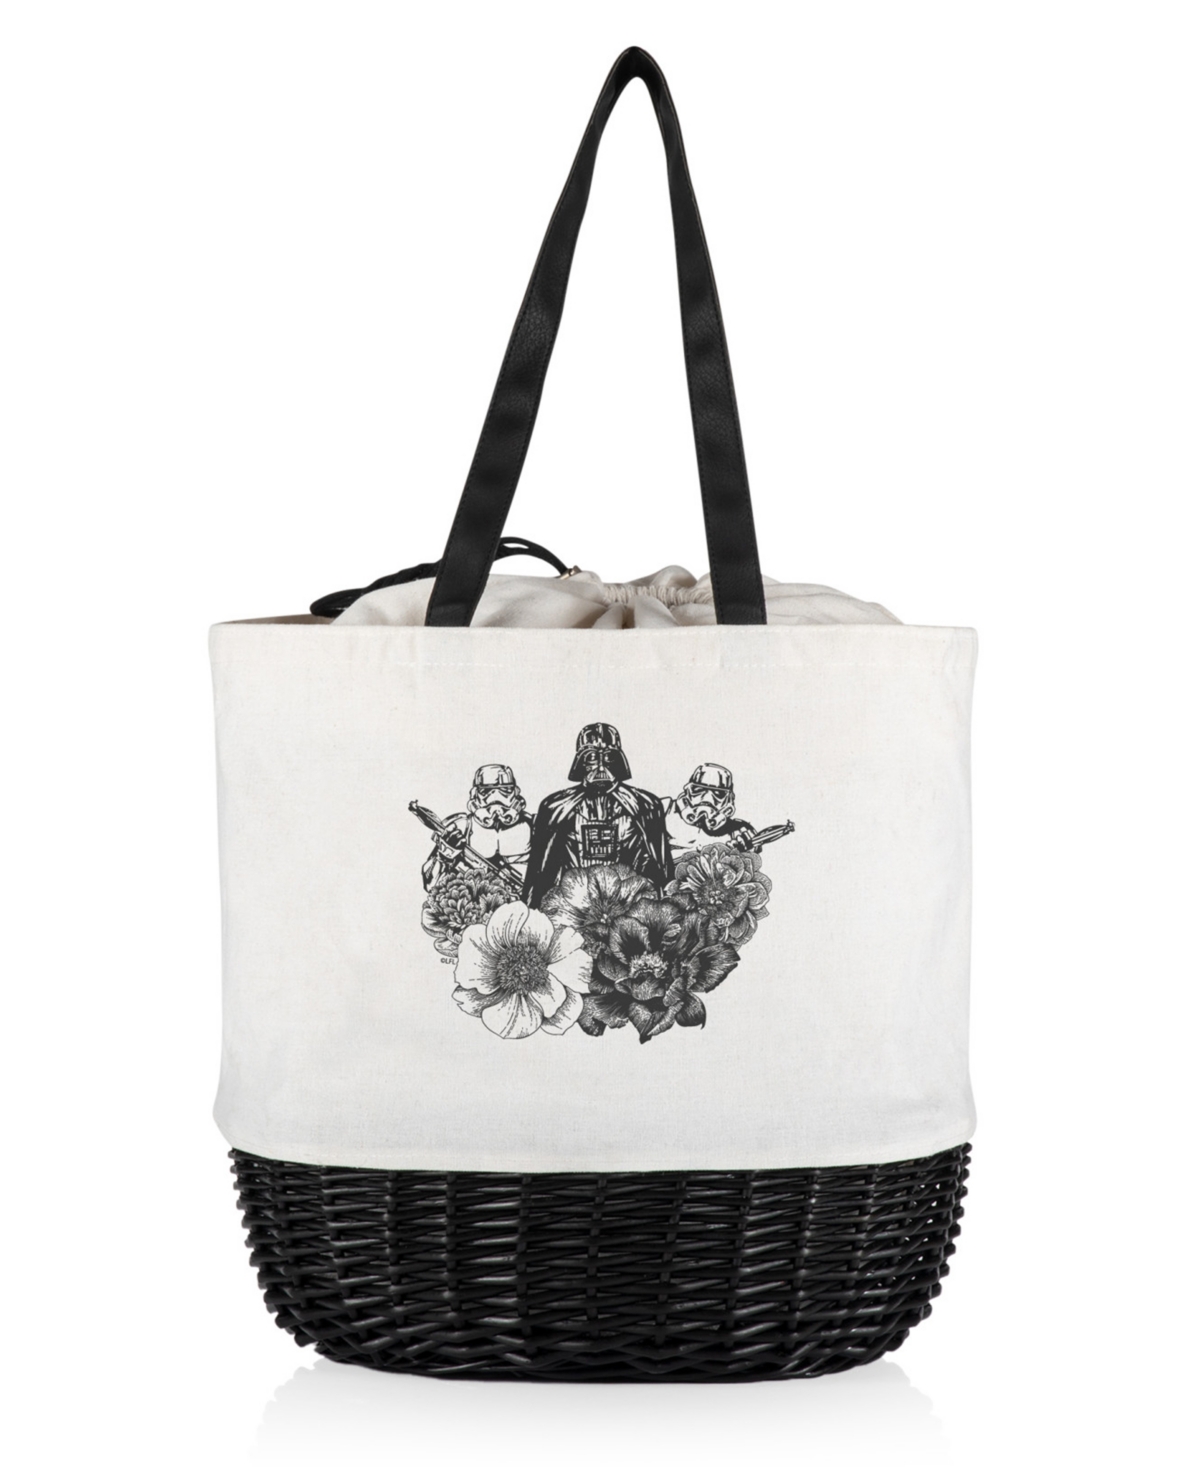 Picnic Time Star Wars Darth Vader Coronado Canvas And Willow Basket Tote In White And Black